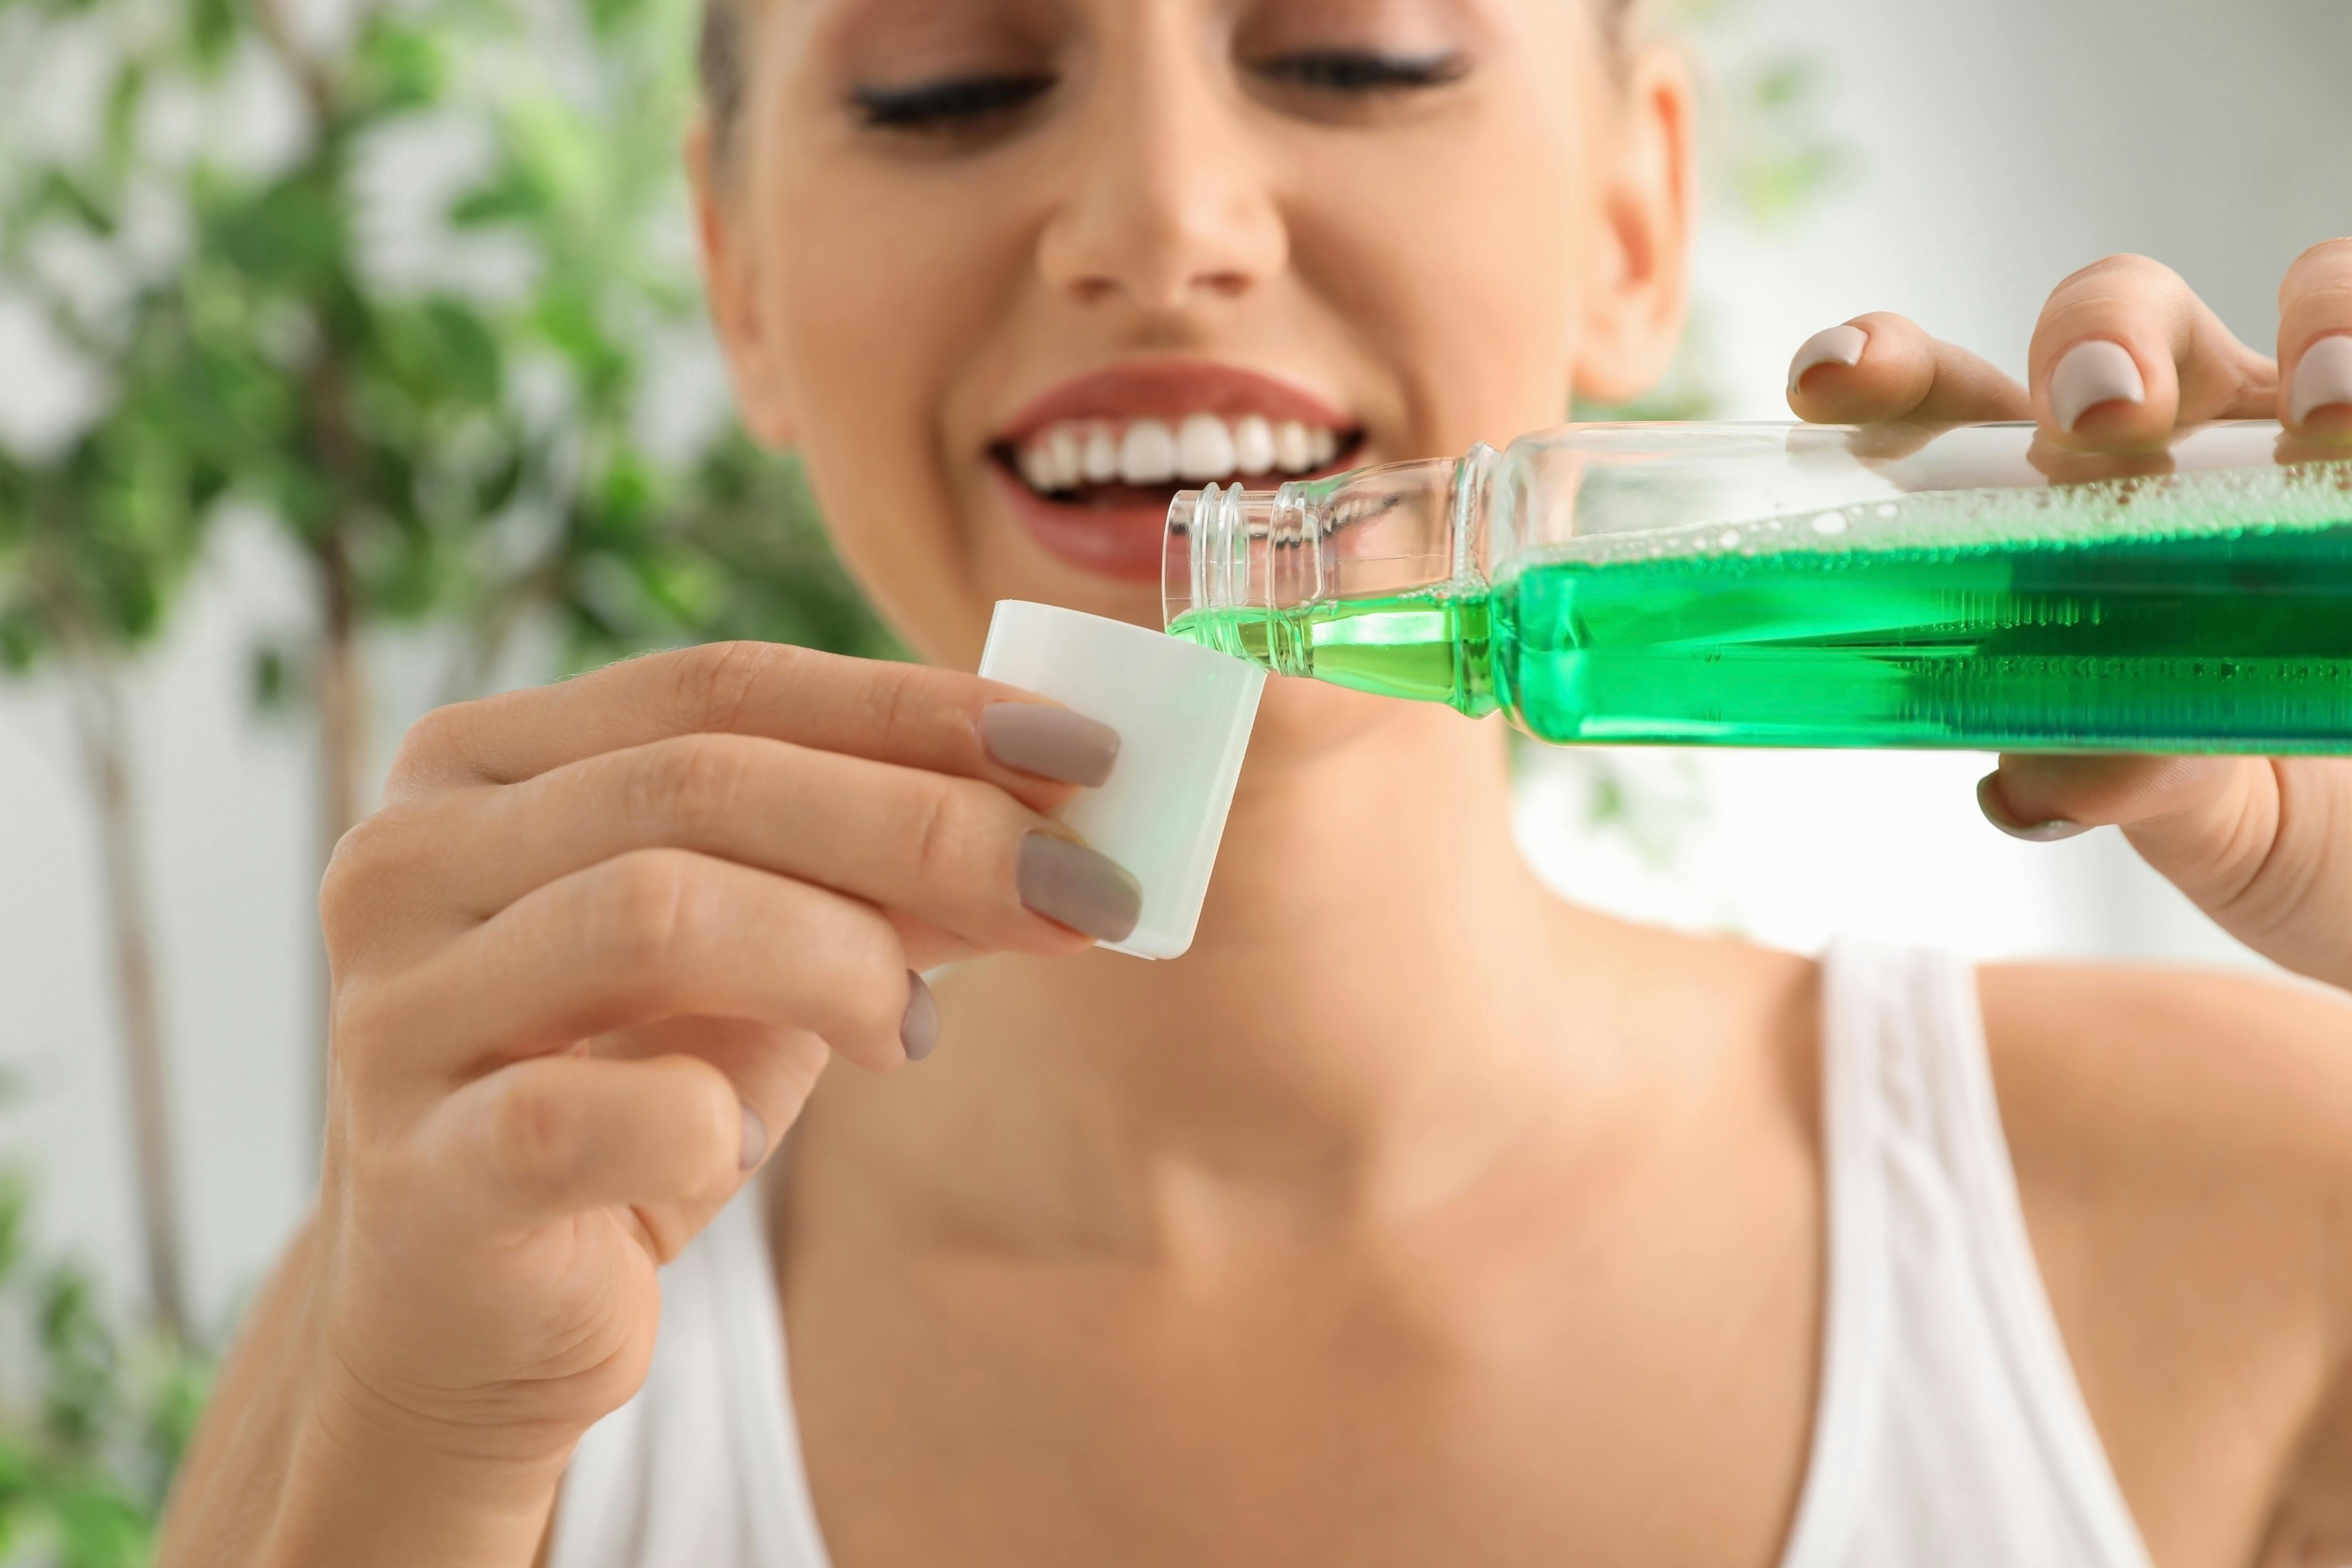 Woman smiles and pours mouthwash into a small cup